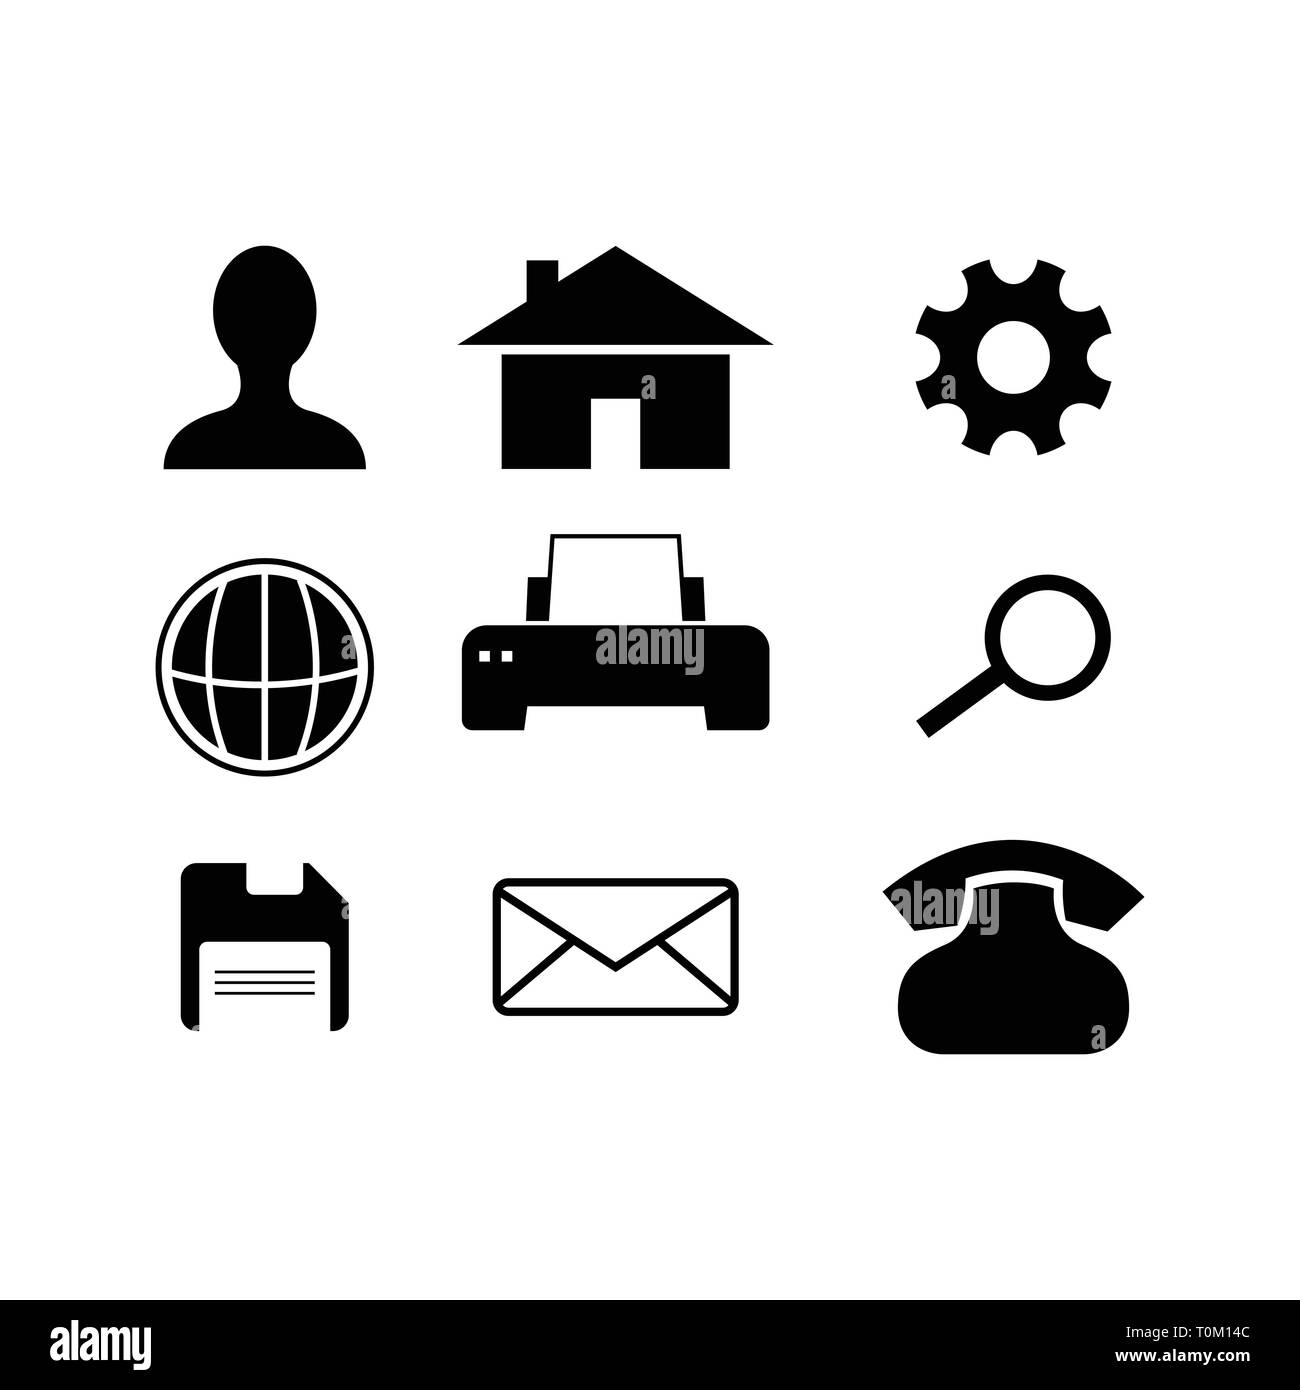 Business icons app set vector Stock Vector